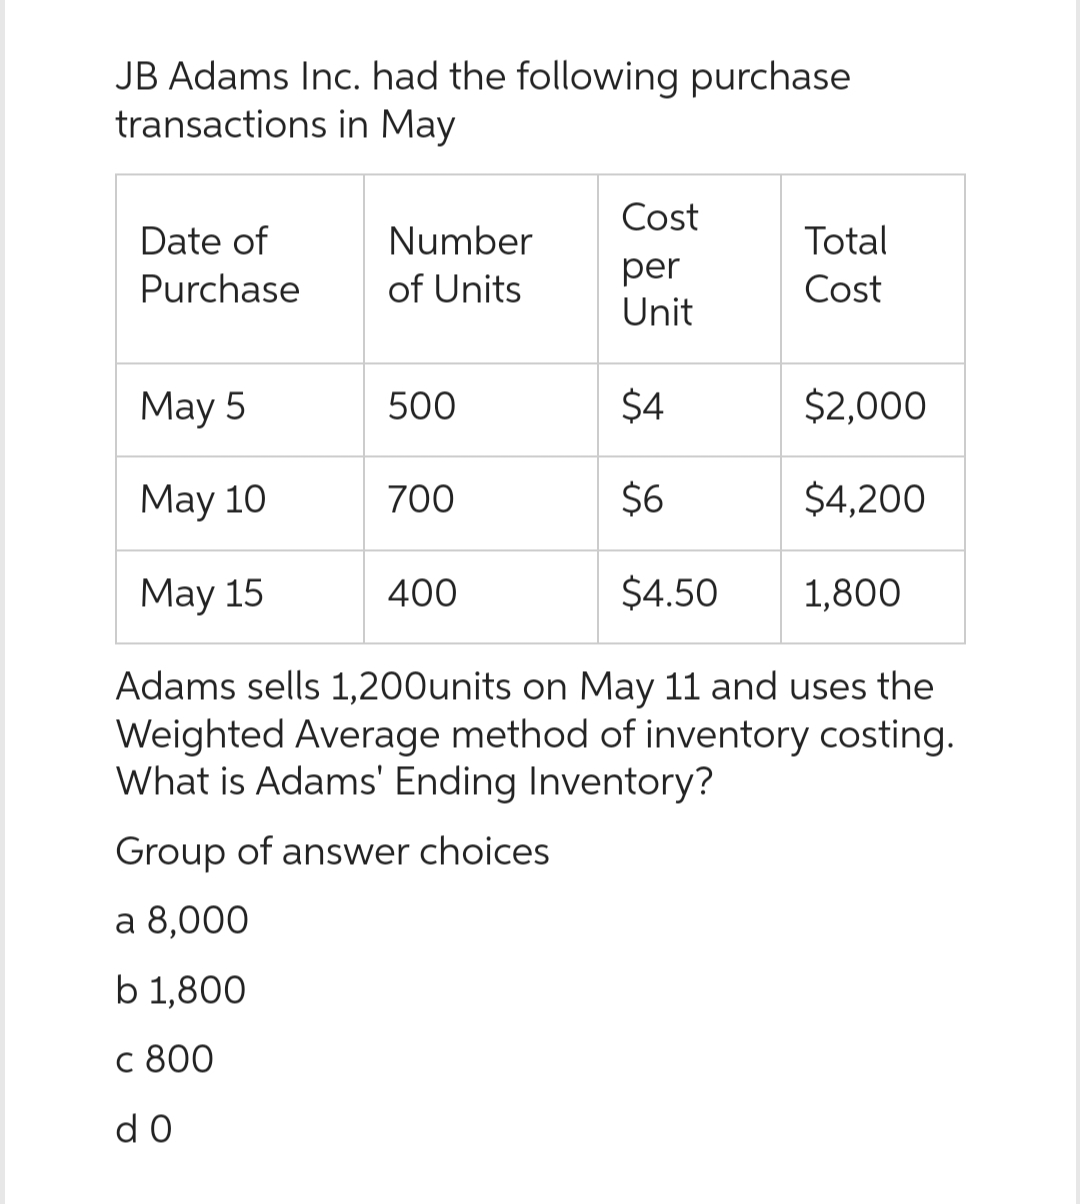 JB Adams Inc. had the following purchase
transactions in May
Date of
Purchase
Number
of Units
500
700
Cost
per
Unit
May 5
$4
May 10
$6
May 15
$4.50
Adams sells 1,200units on May 11 and uses the
Weighted Average method of inventory costing.
What is Adams' Ending Inventory?
Group of answer choices
a 8,000
b 1,800
C 800
do
400
Total
Cost
$2,000
$4,200
1,800